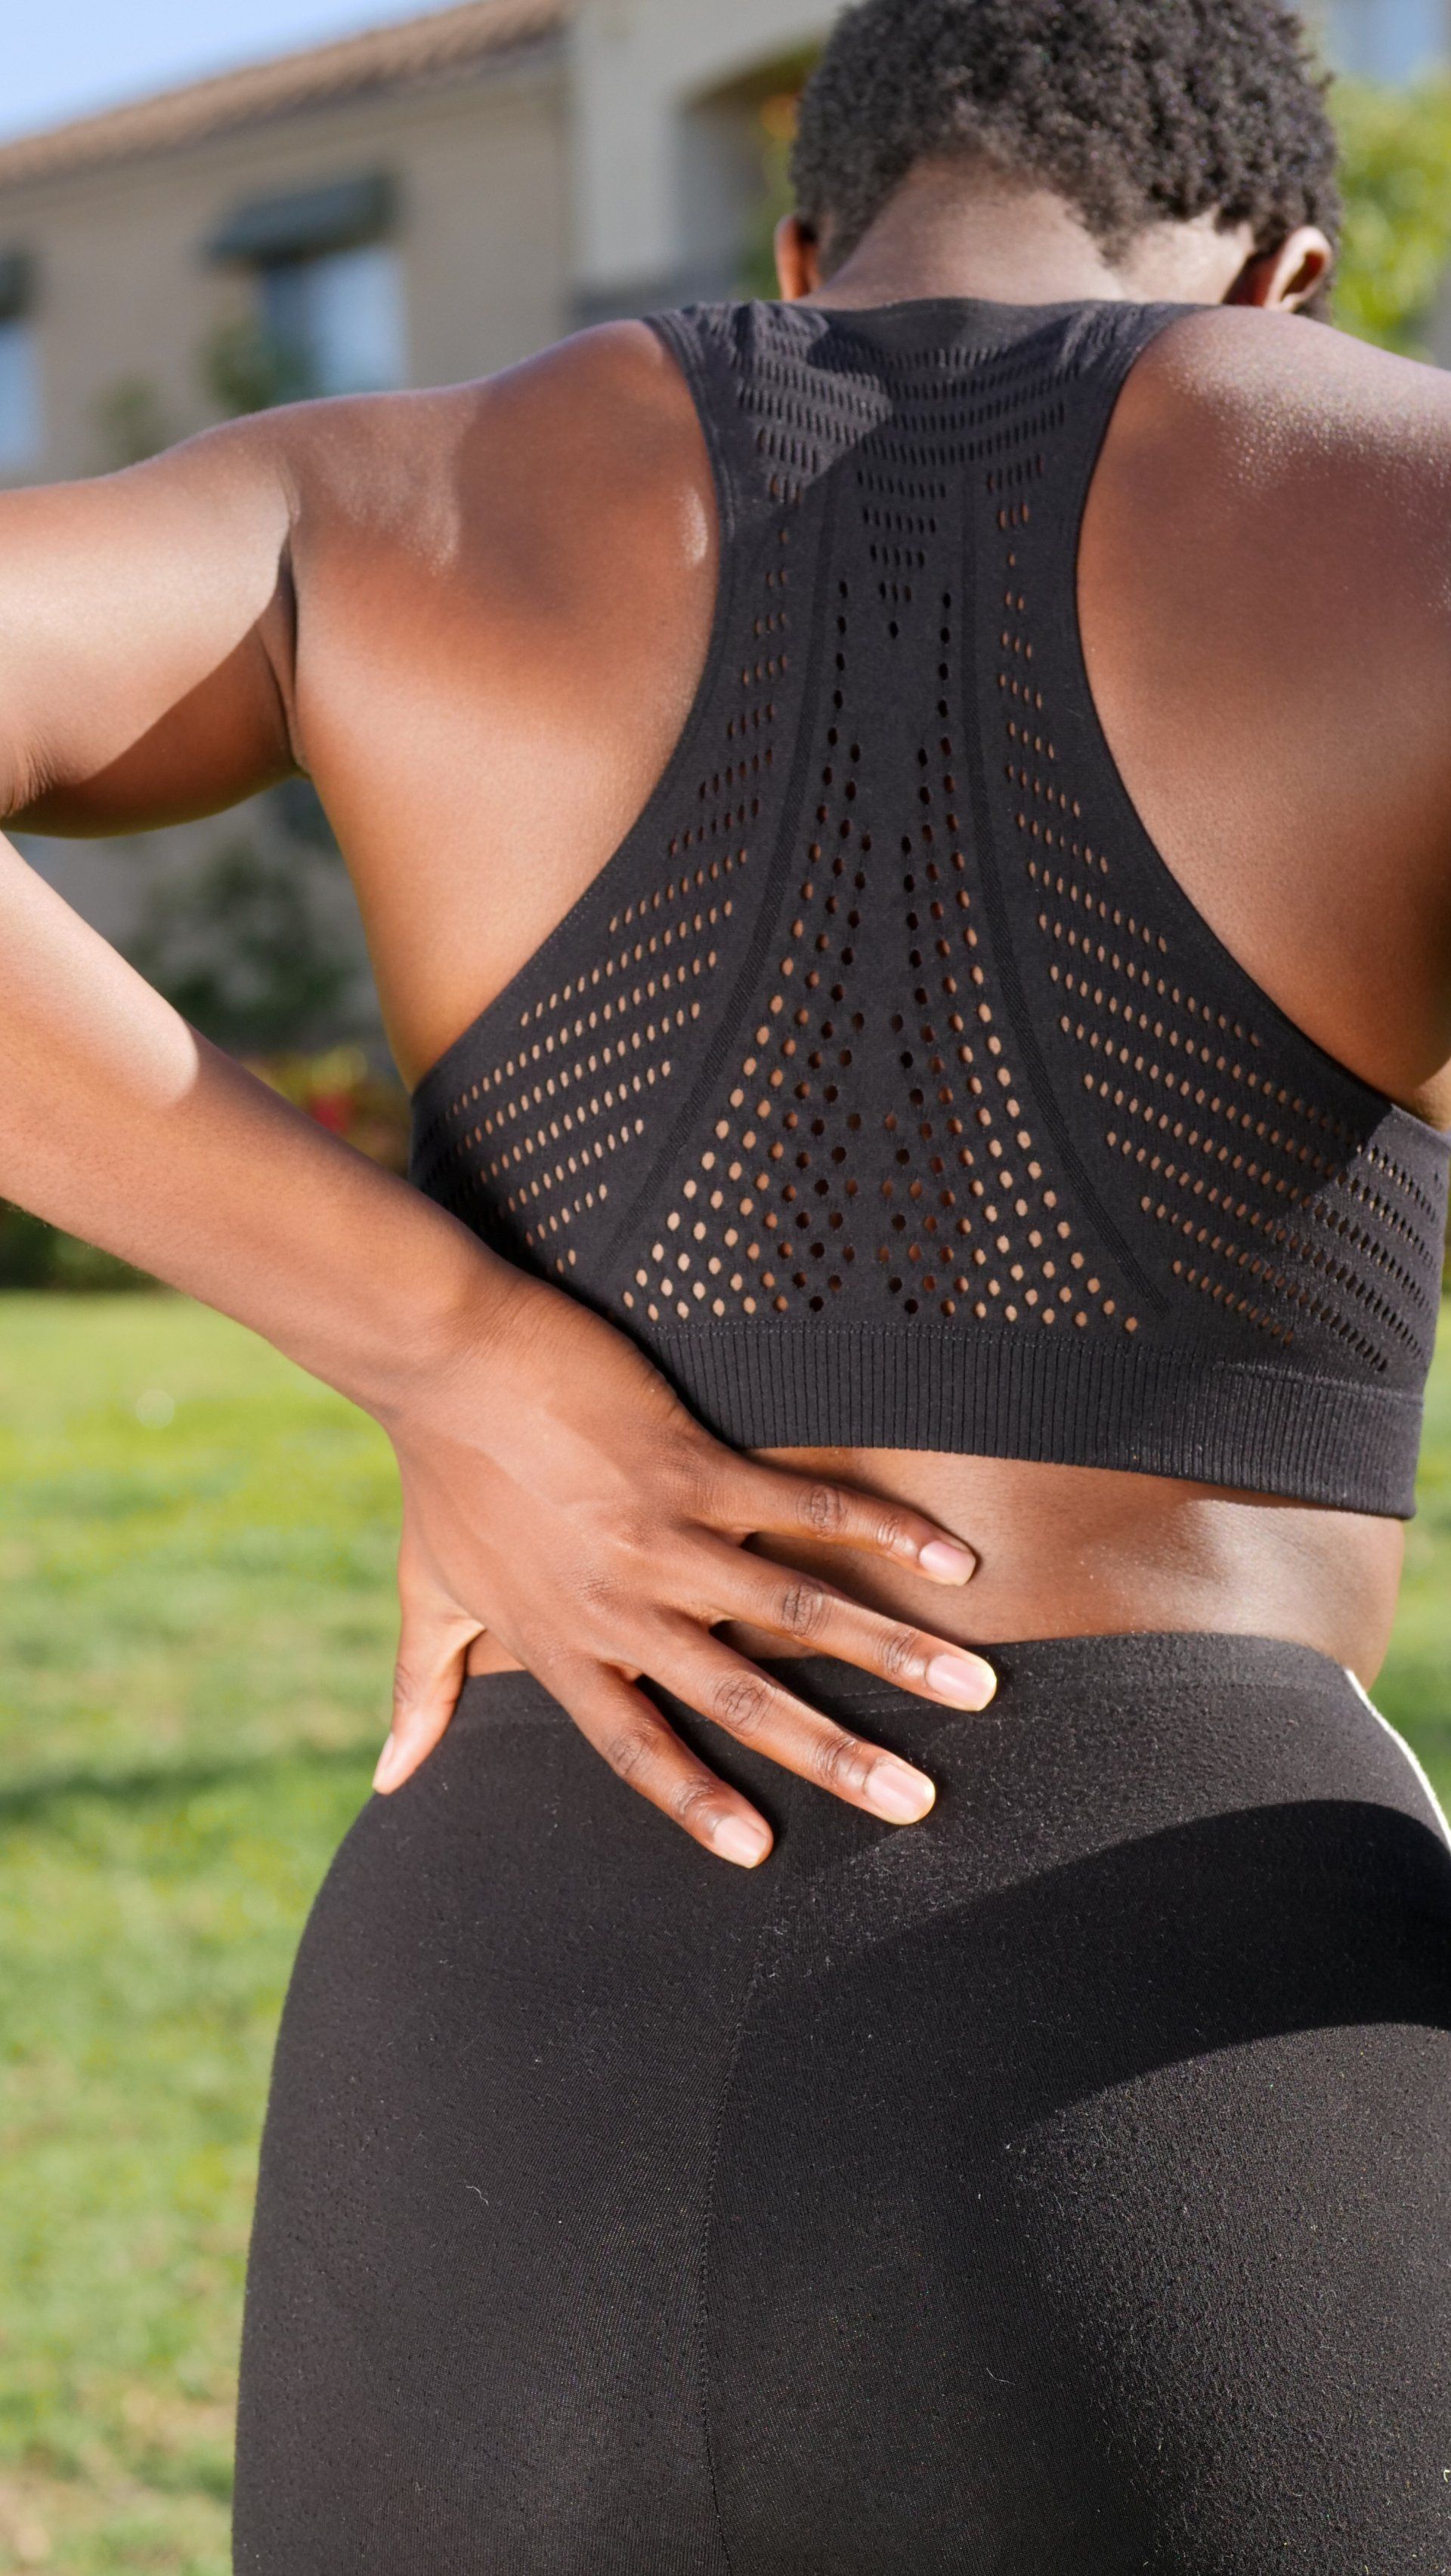 A woman in a black sports bra and leggings is holding her back in pain.